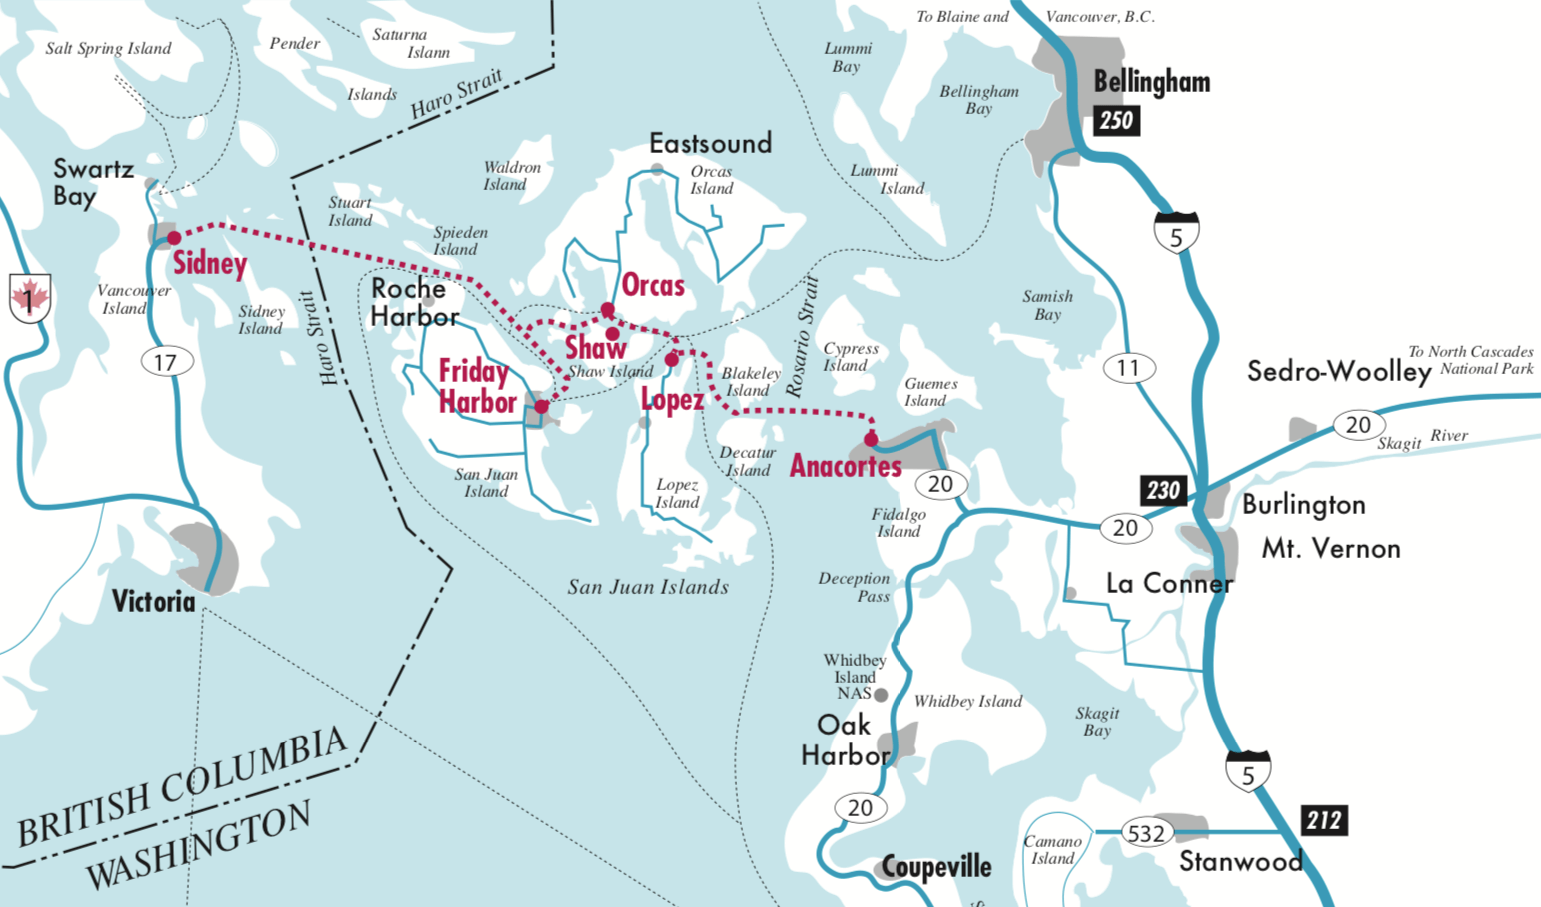 This is a ferry map for the Washington State Ferry system and covers the north most section of the service from Anacortes, Washington to the various San Juan Islands. The ferry routes are in dotted red lines with the ports written in red lettering while major roadways are featured in teal green color.